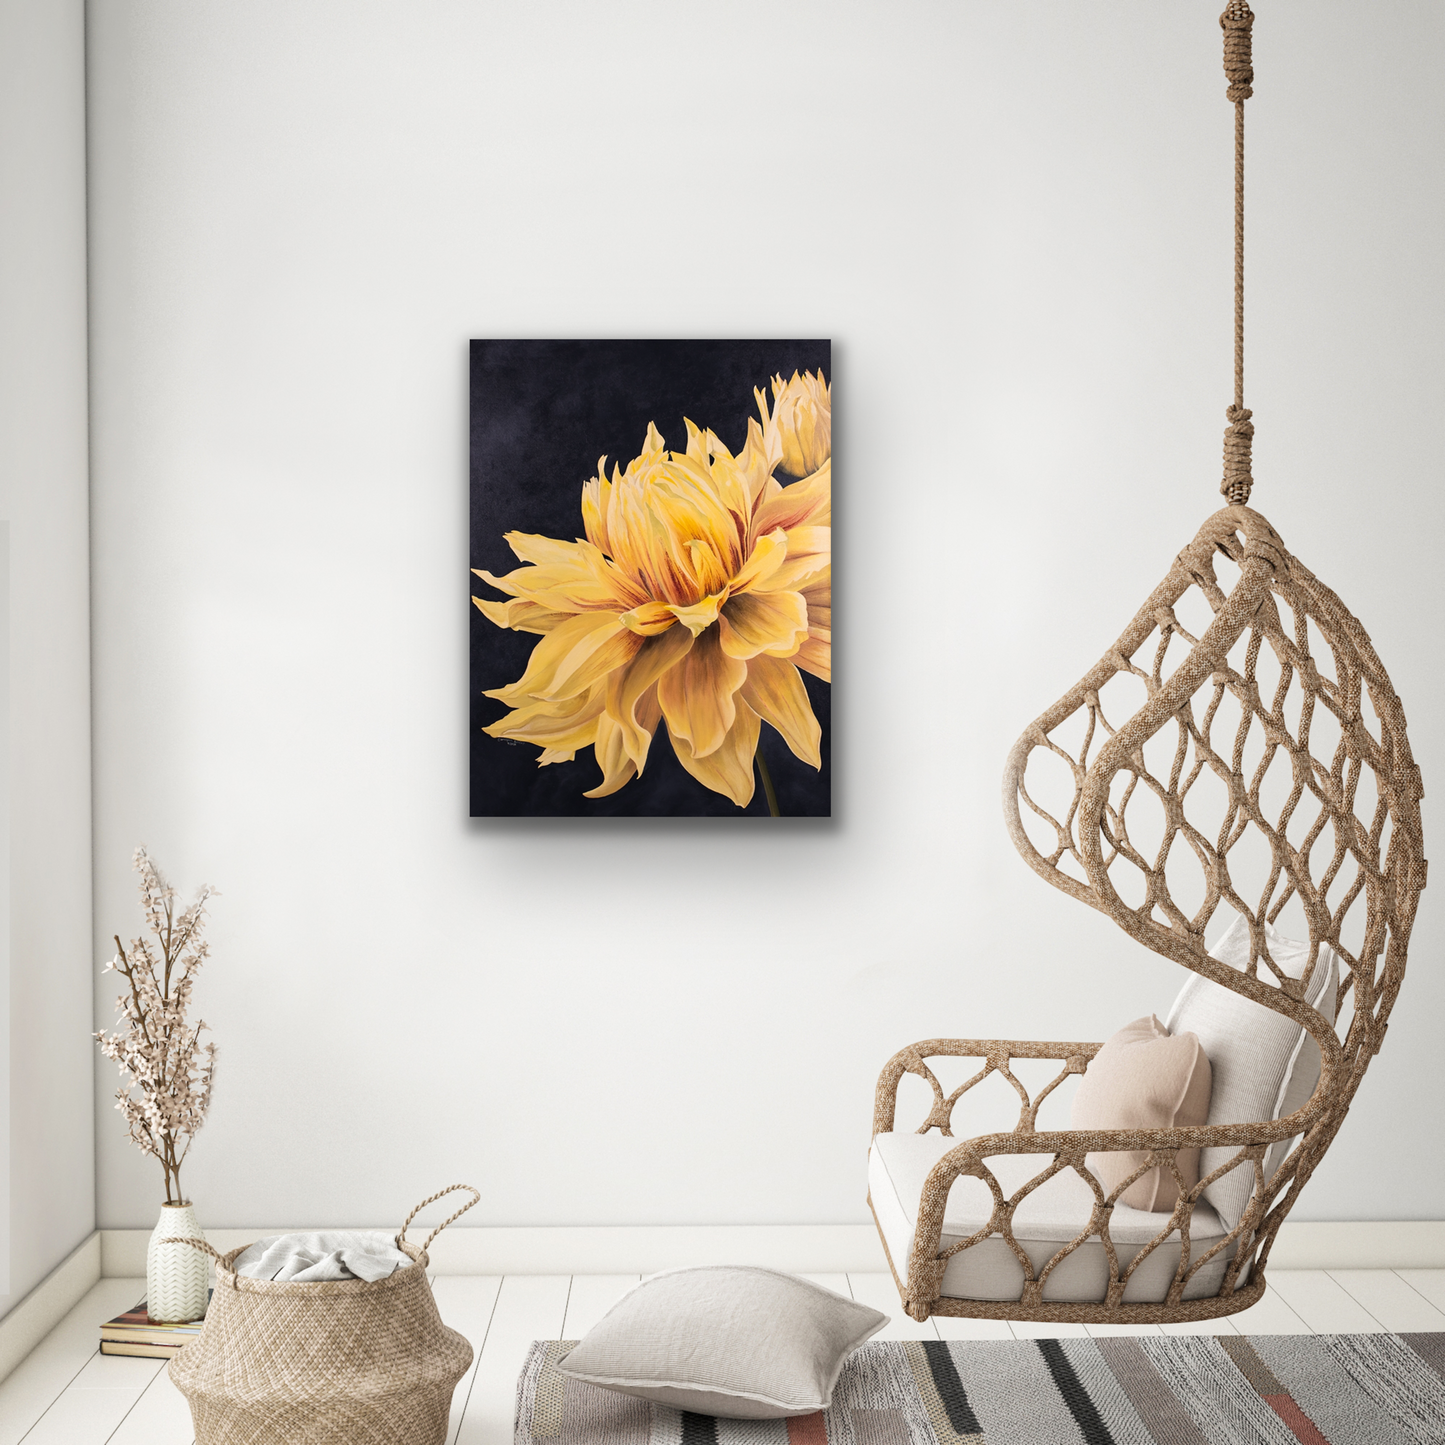 Dancing realistic canvas print comes in various sizes to fit your wall perfectly. 